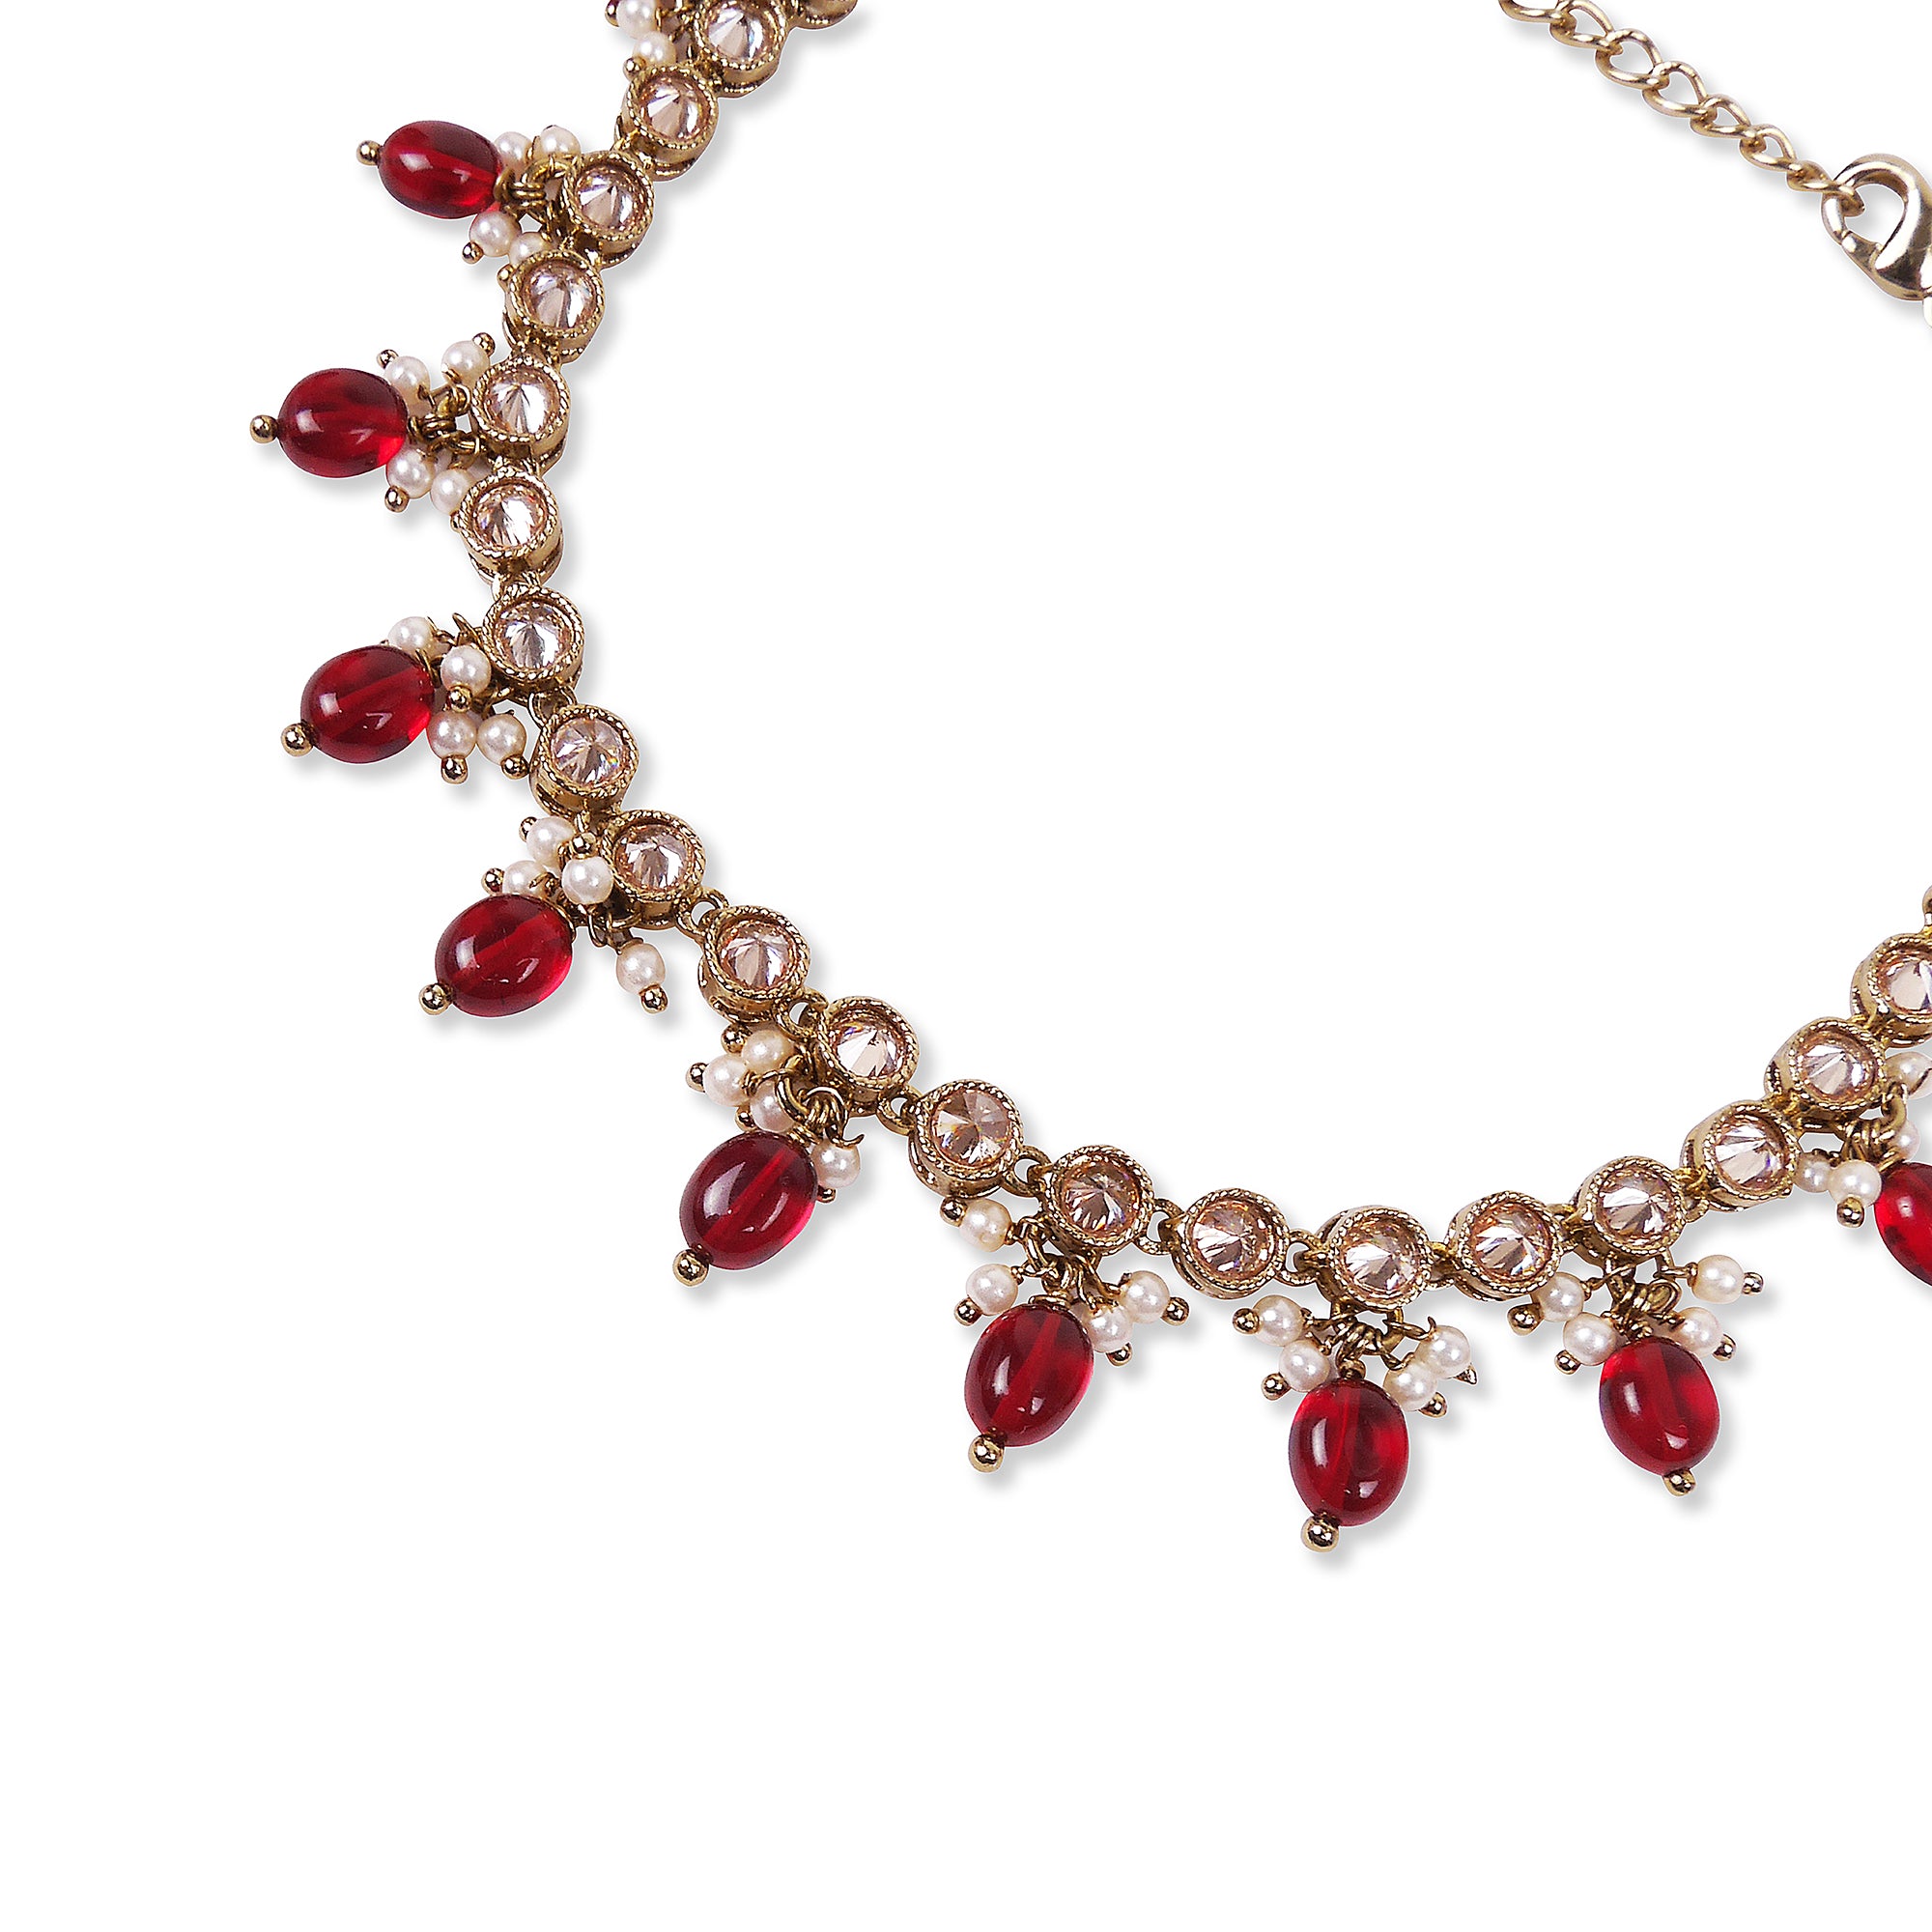 Avini Anklet in Maroon and Antique Gold